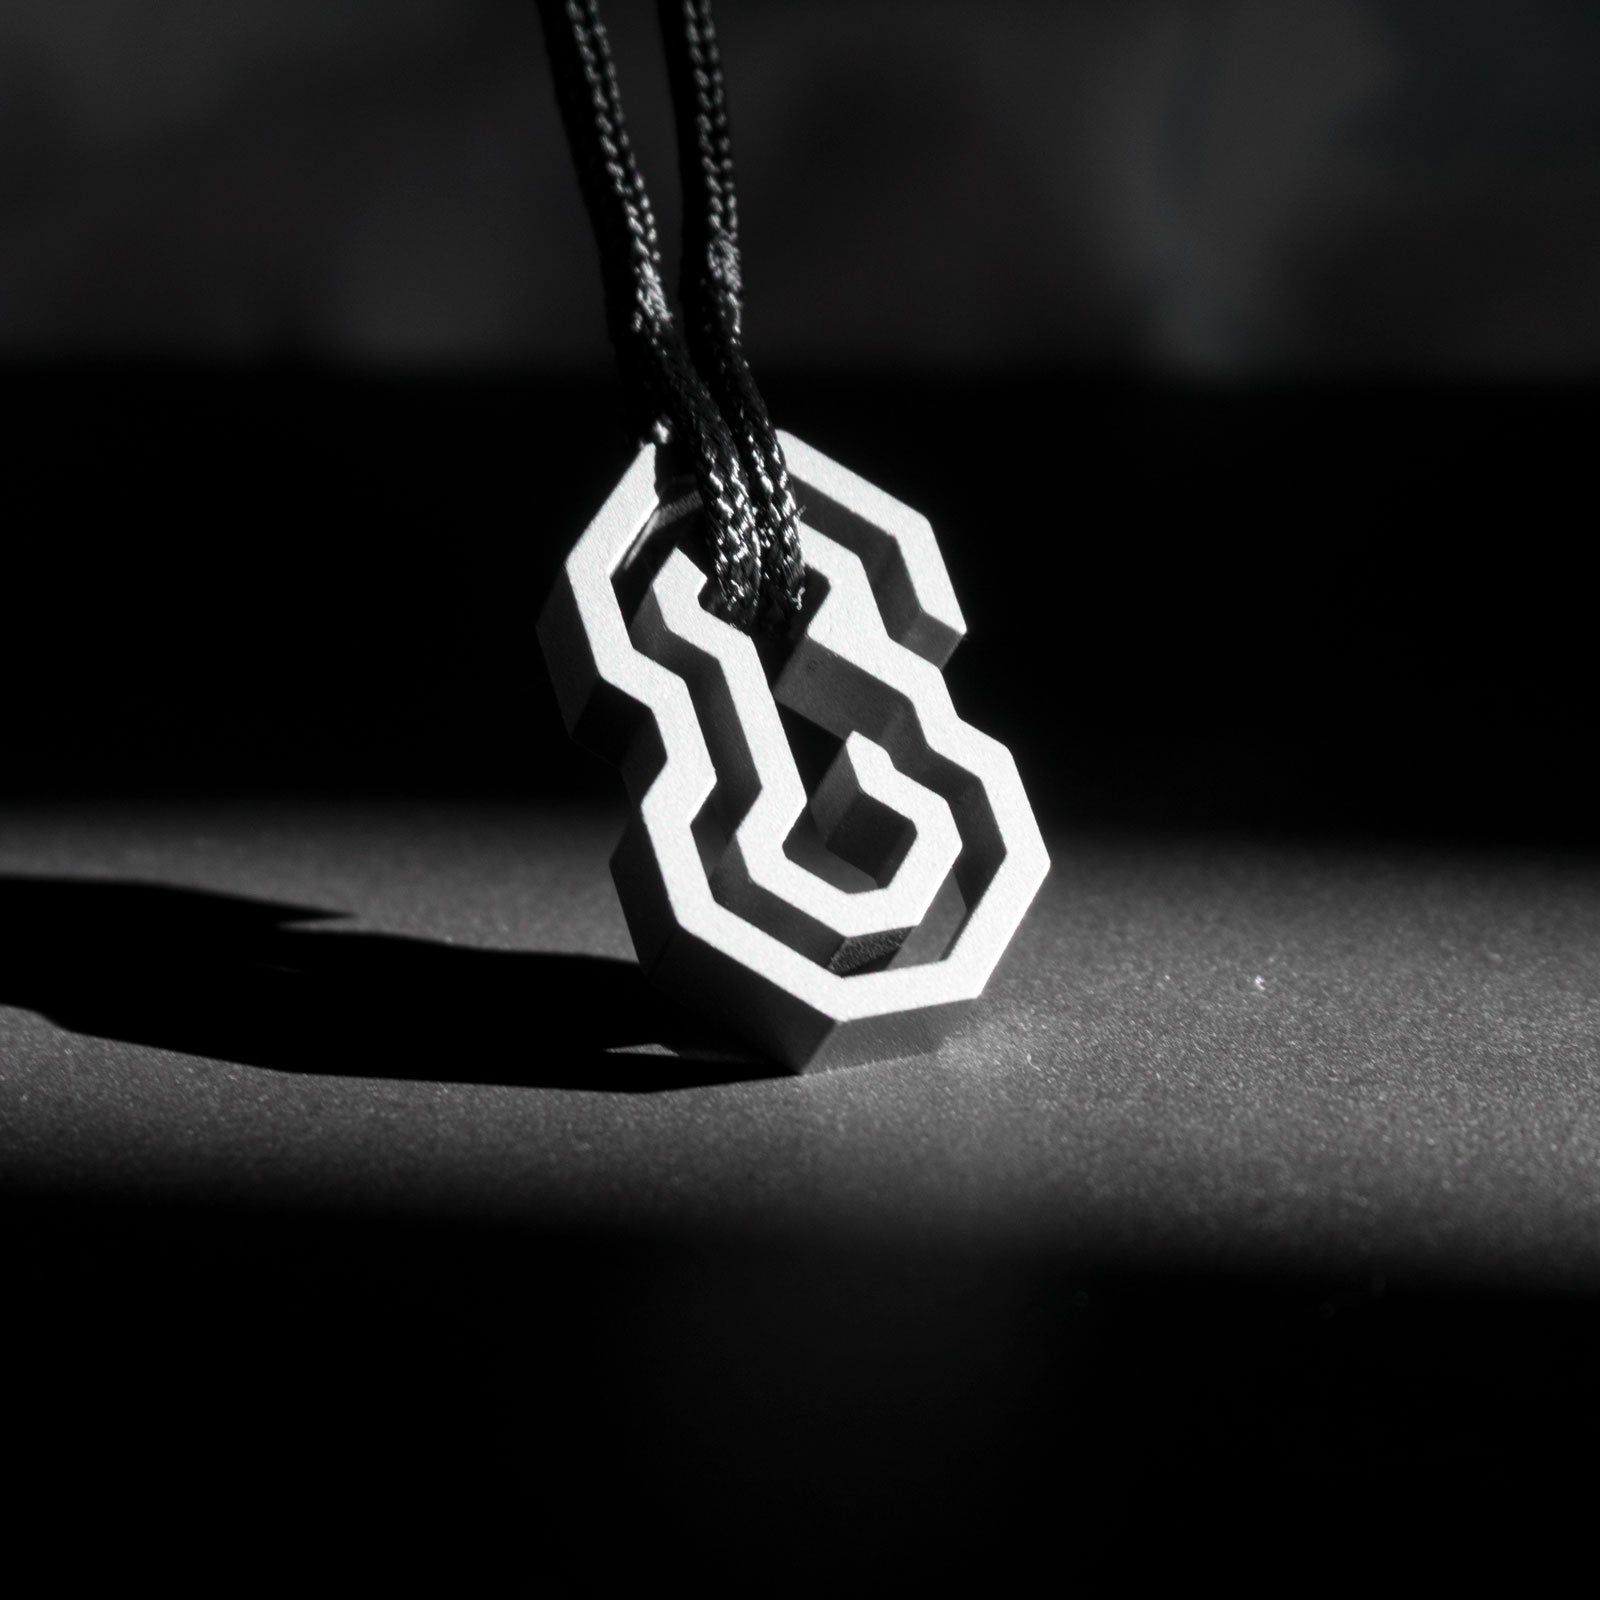 The Daidalos is a minimalist, timeless pendant, handmade from grade 5 titanium and a nearly indestructible rope. Its shape is inspired by the eponymous maze, wherein you need to slide the rope through the maze, until it reaches the center and securely nests itself, almost like a mini puzzle.